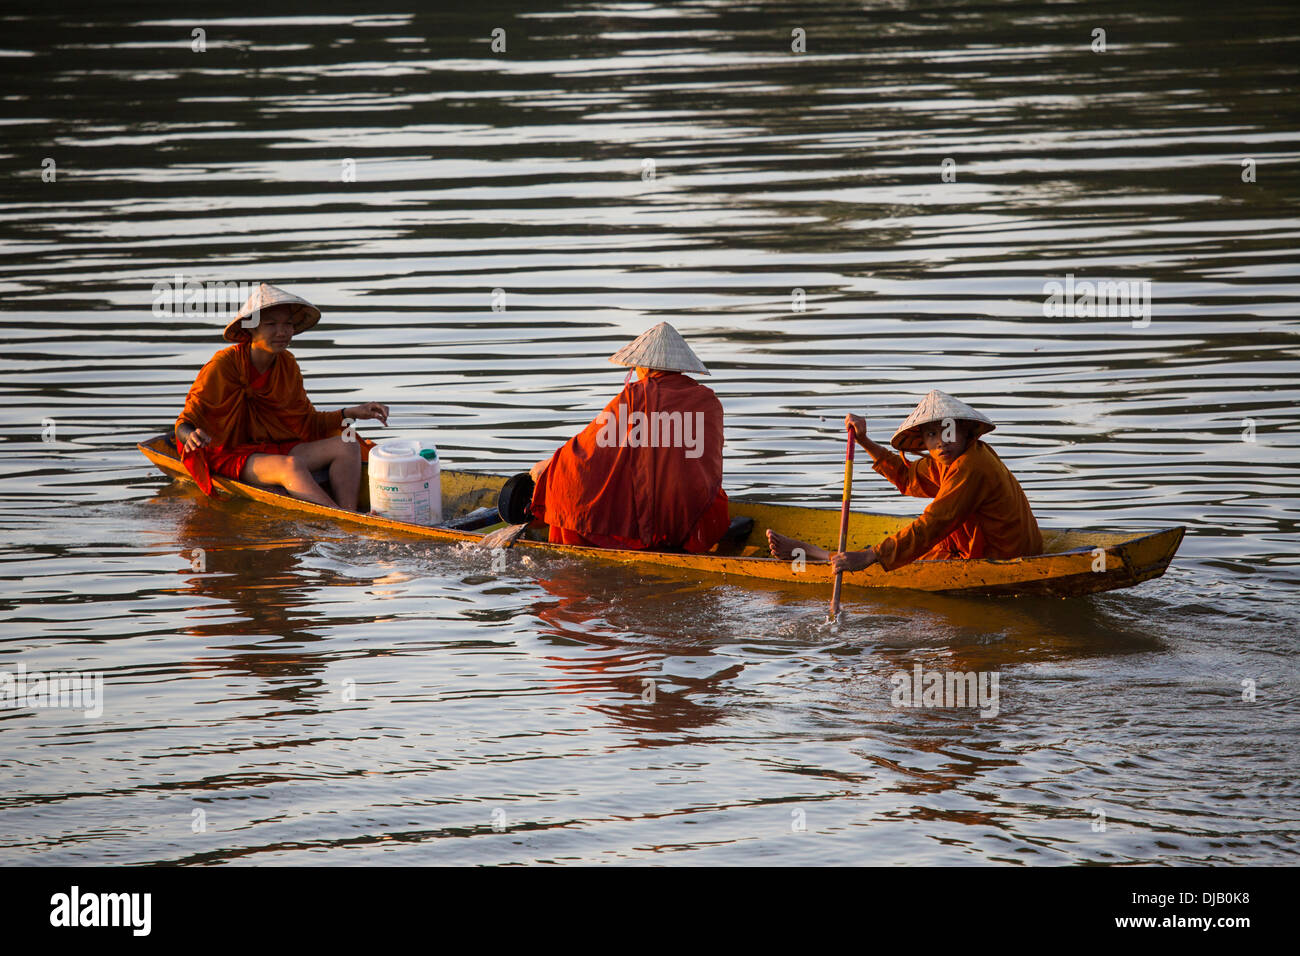 Buddhist monks on a row boat on the Mekong River in Pakse, Laos Stock Photo